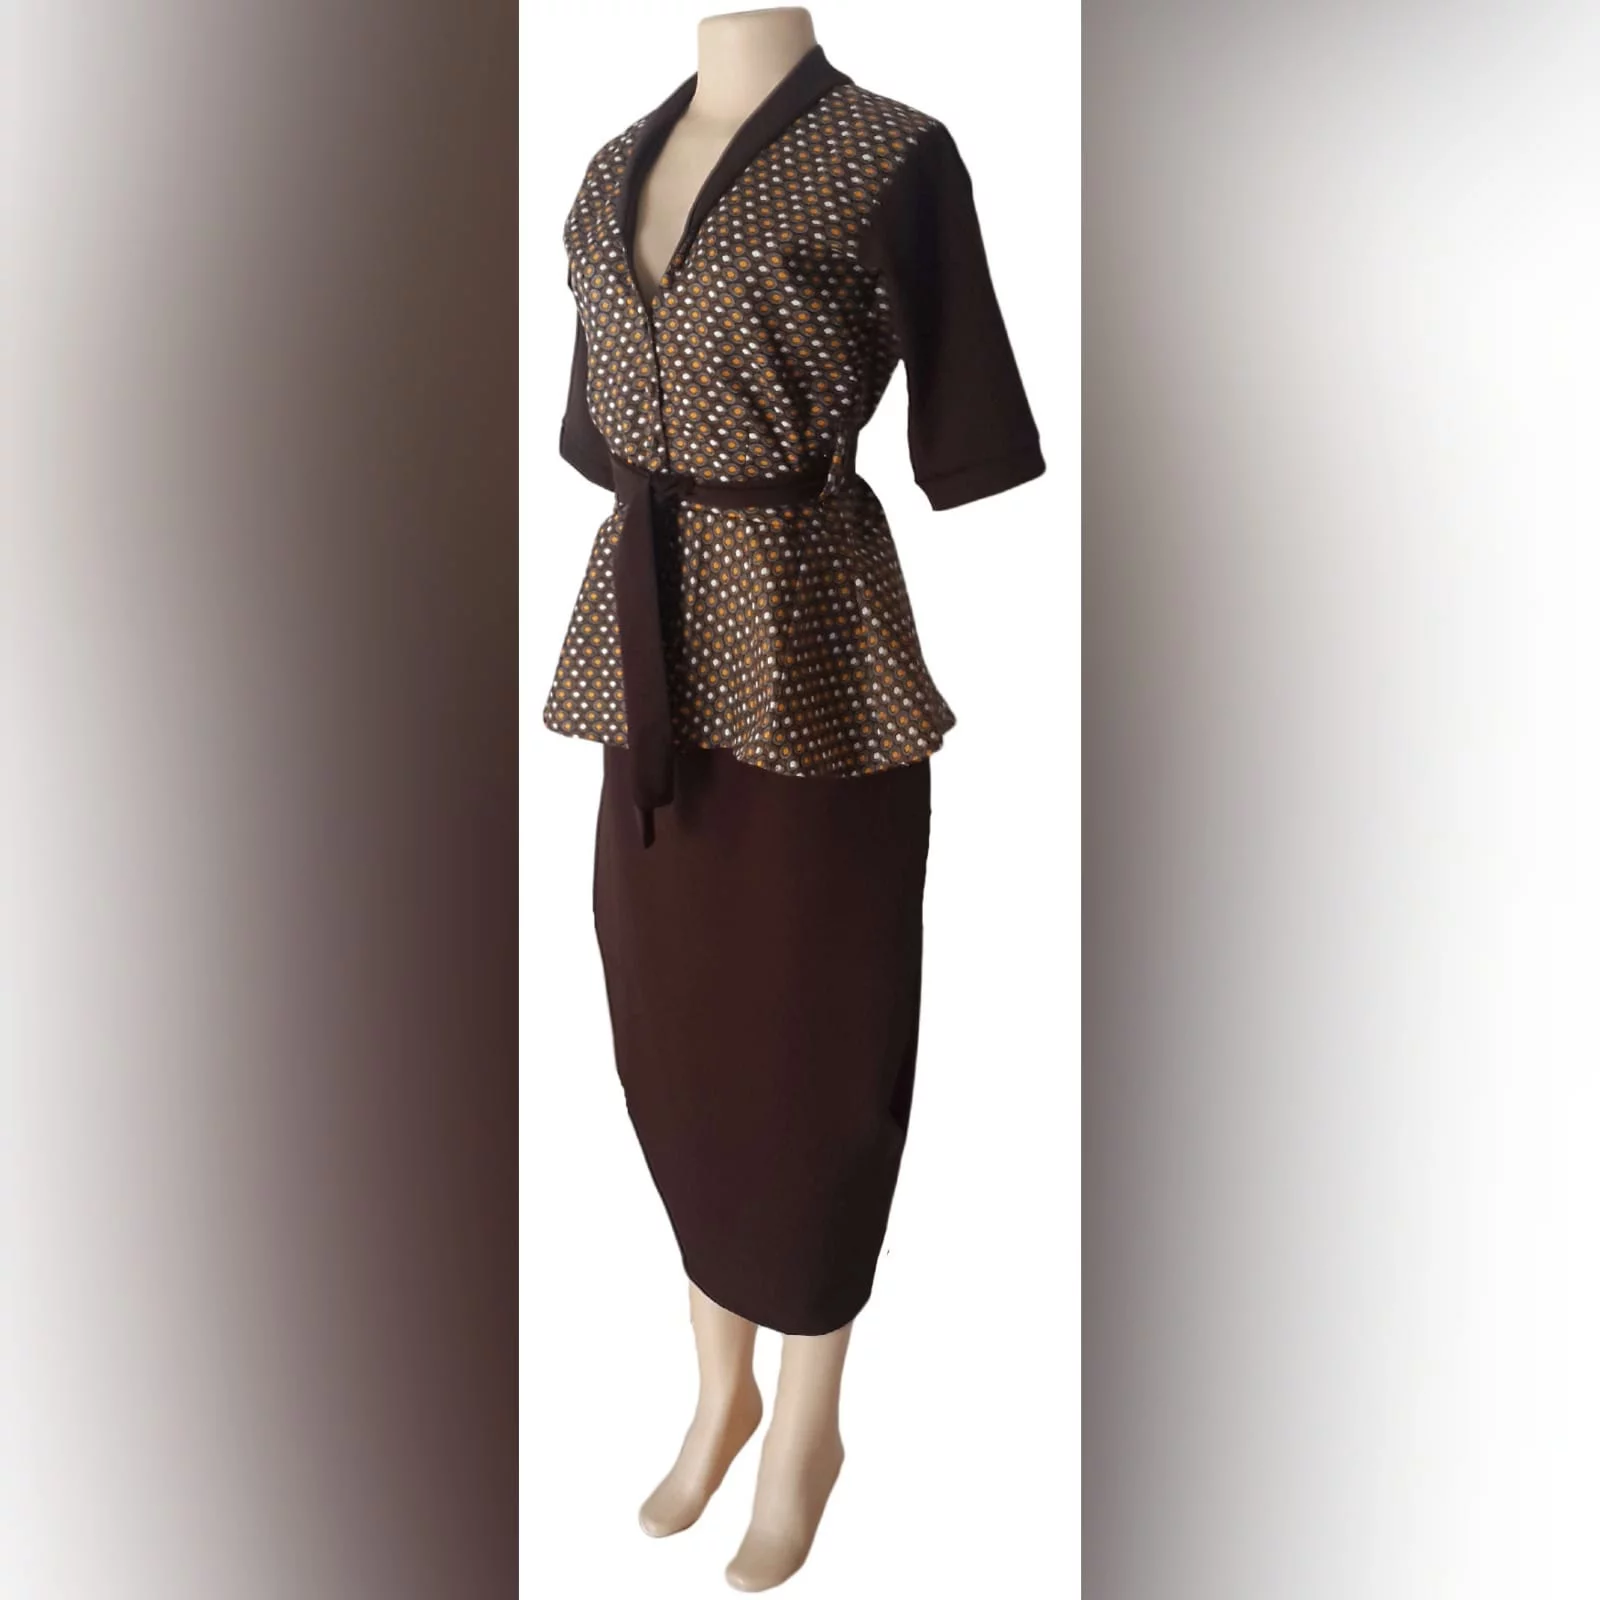 Xhosa traditional wear blouse and matching brown pencil skirt 2 a pencil skirt below the knee with a back slit. With a xhosa traditional blouse. Blouse with sleeves, collar and belt in brown matching the skirt.